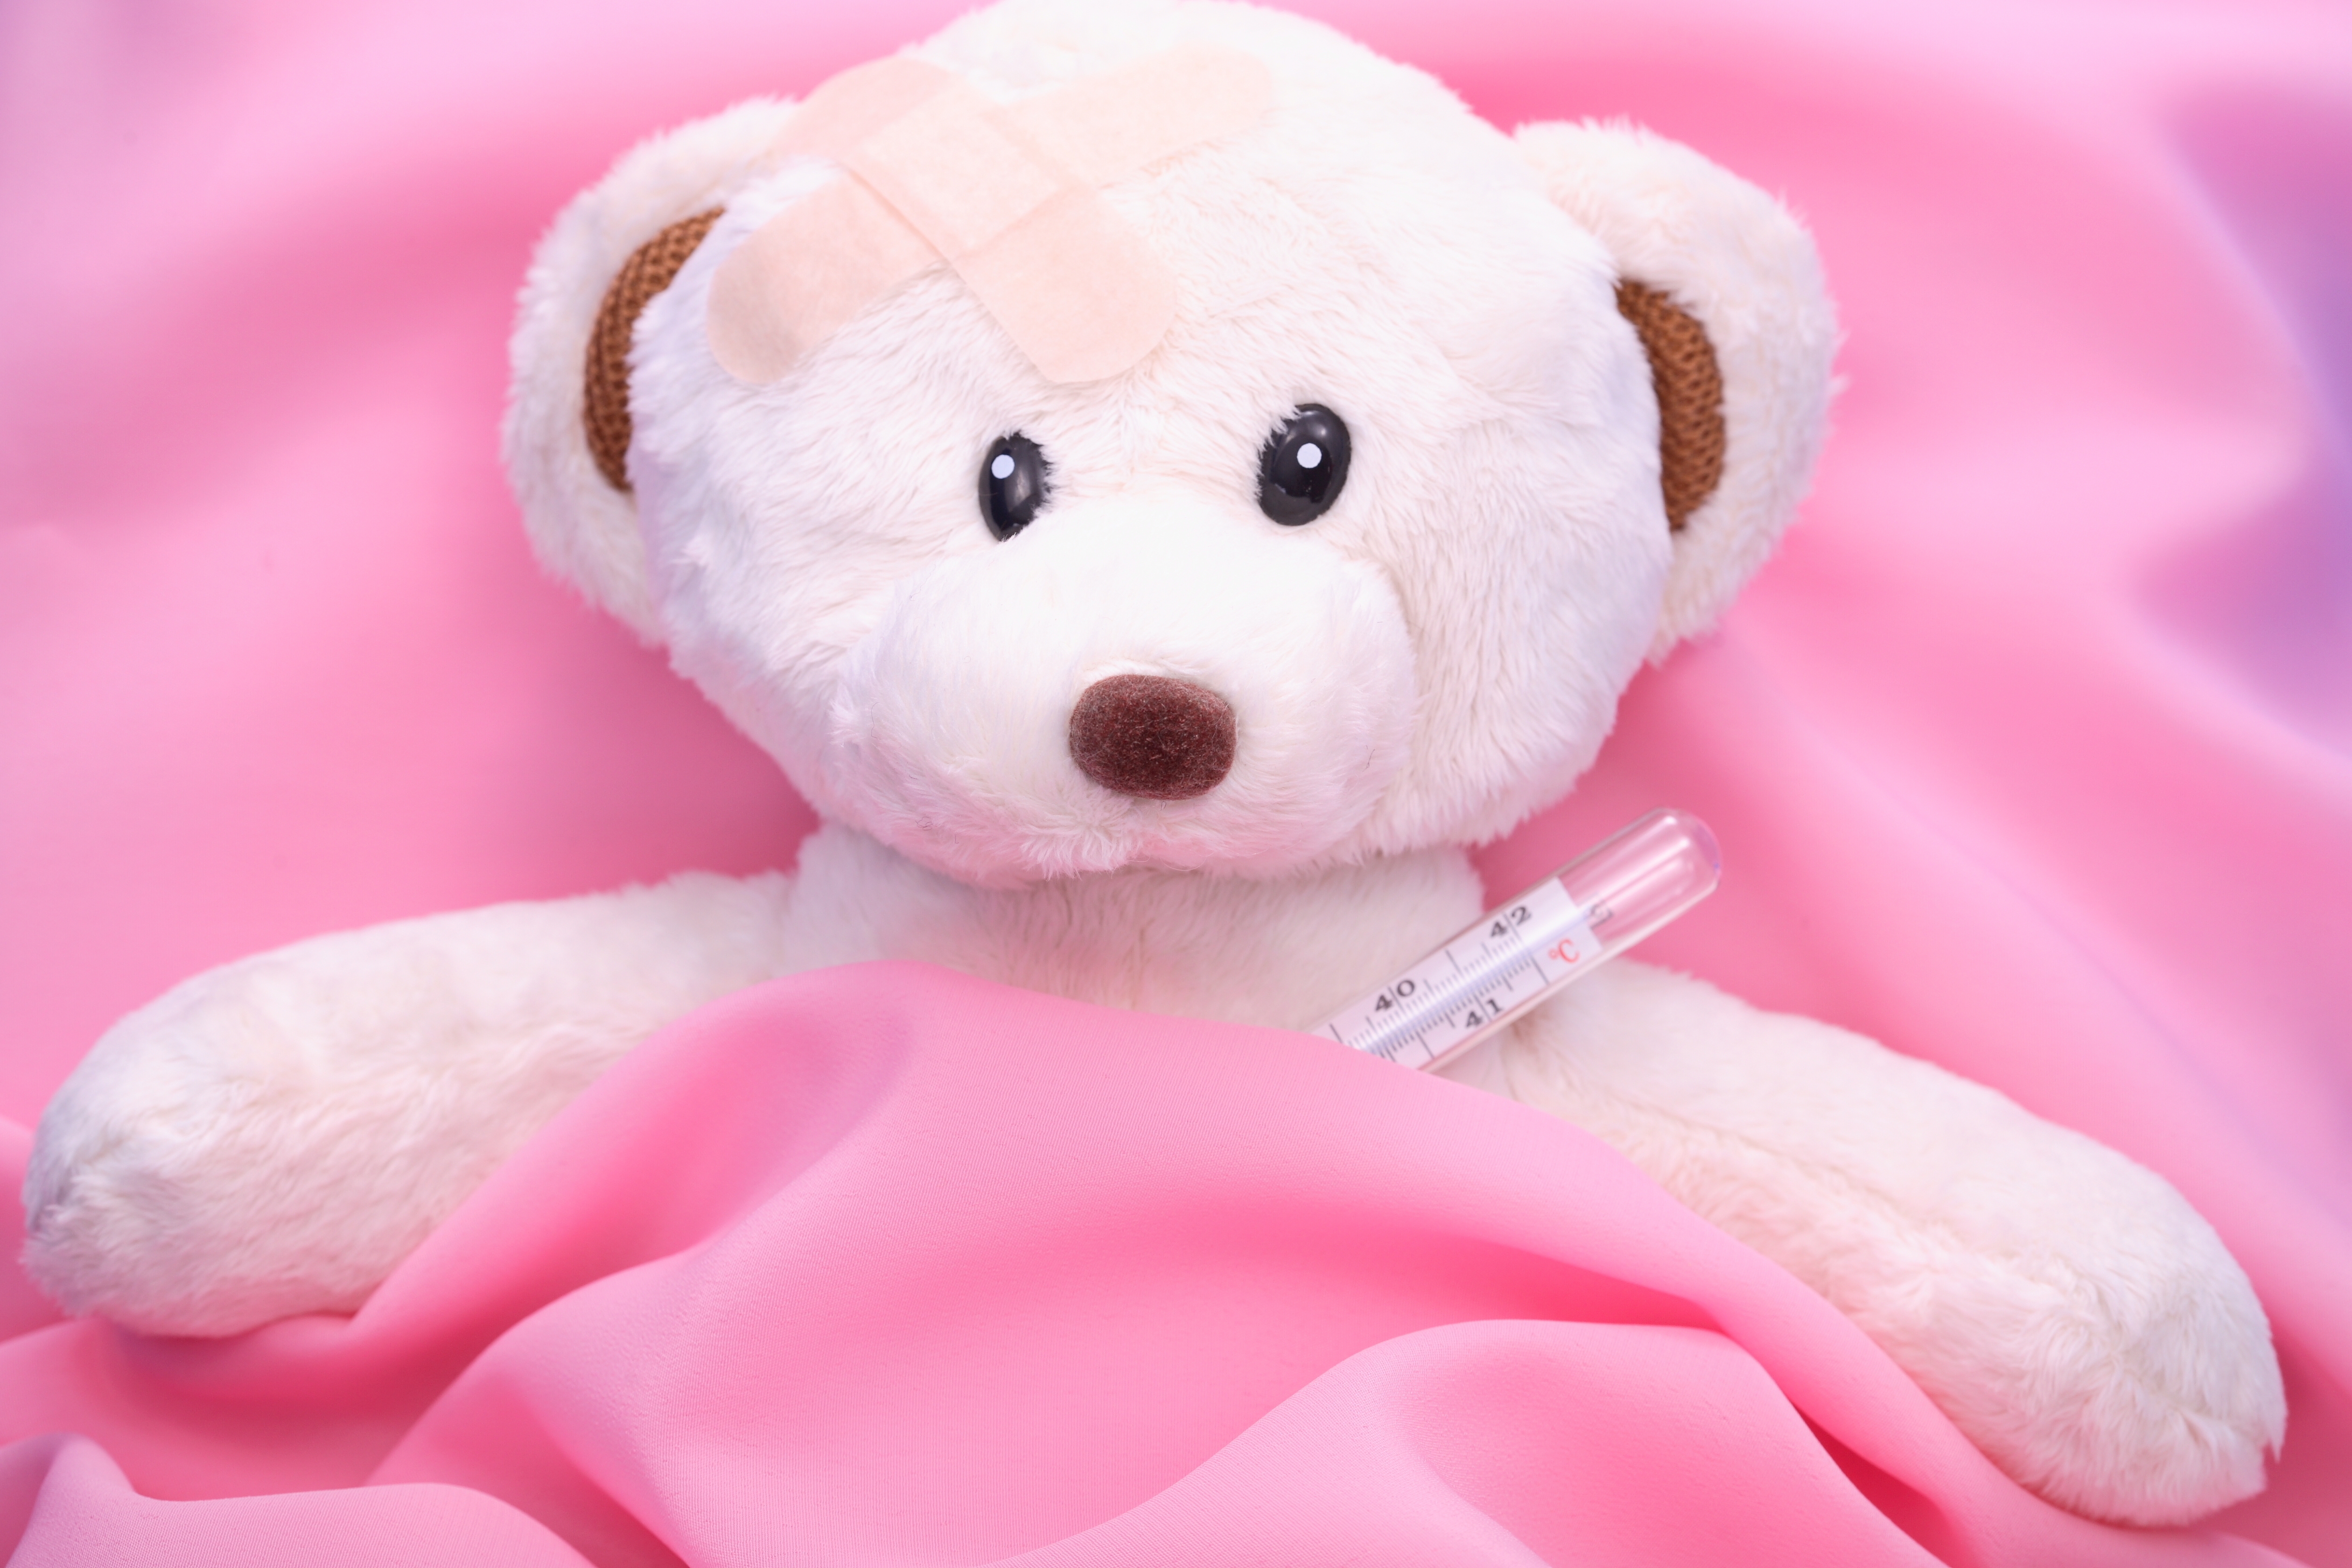 teddy bear, miscellanea, miscellaneous, toy, bed, disease, illness, plaster, patch, thermometer cell phone wallpapers